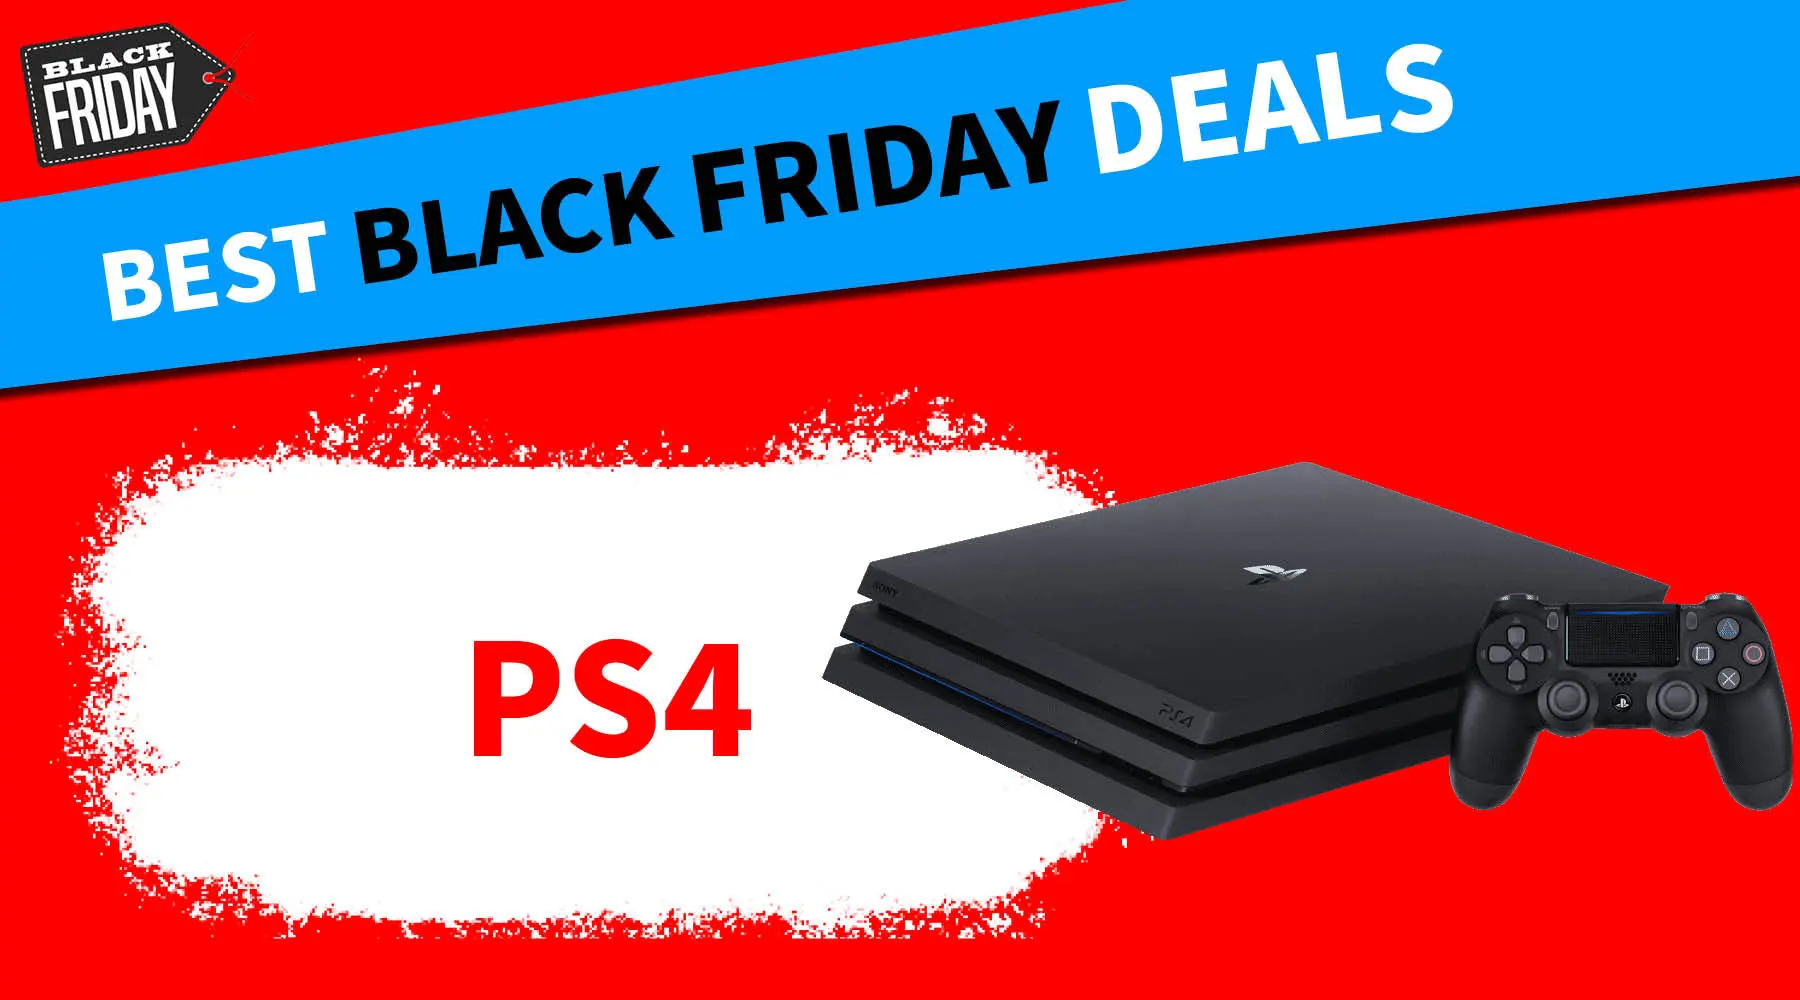 ps4 on sale for black friday